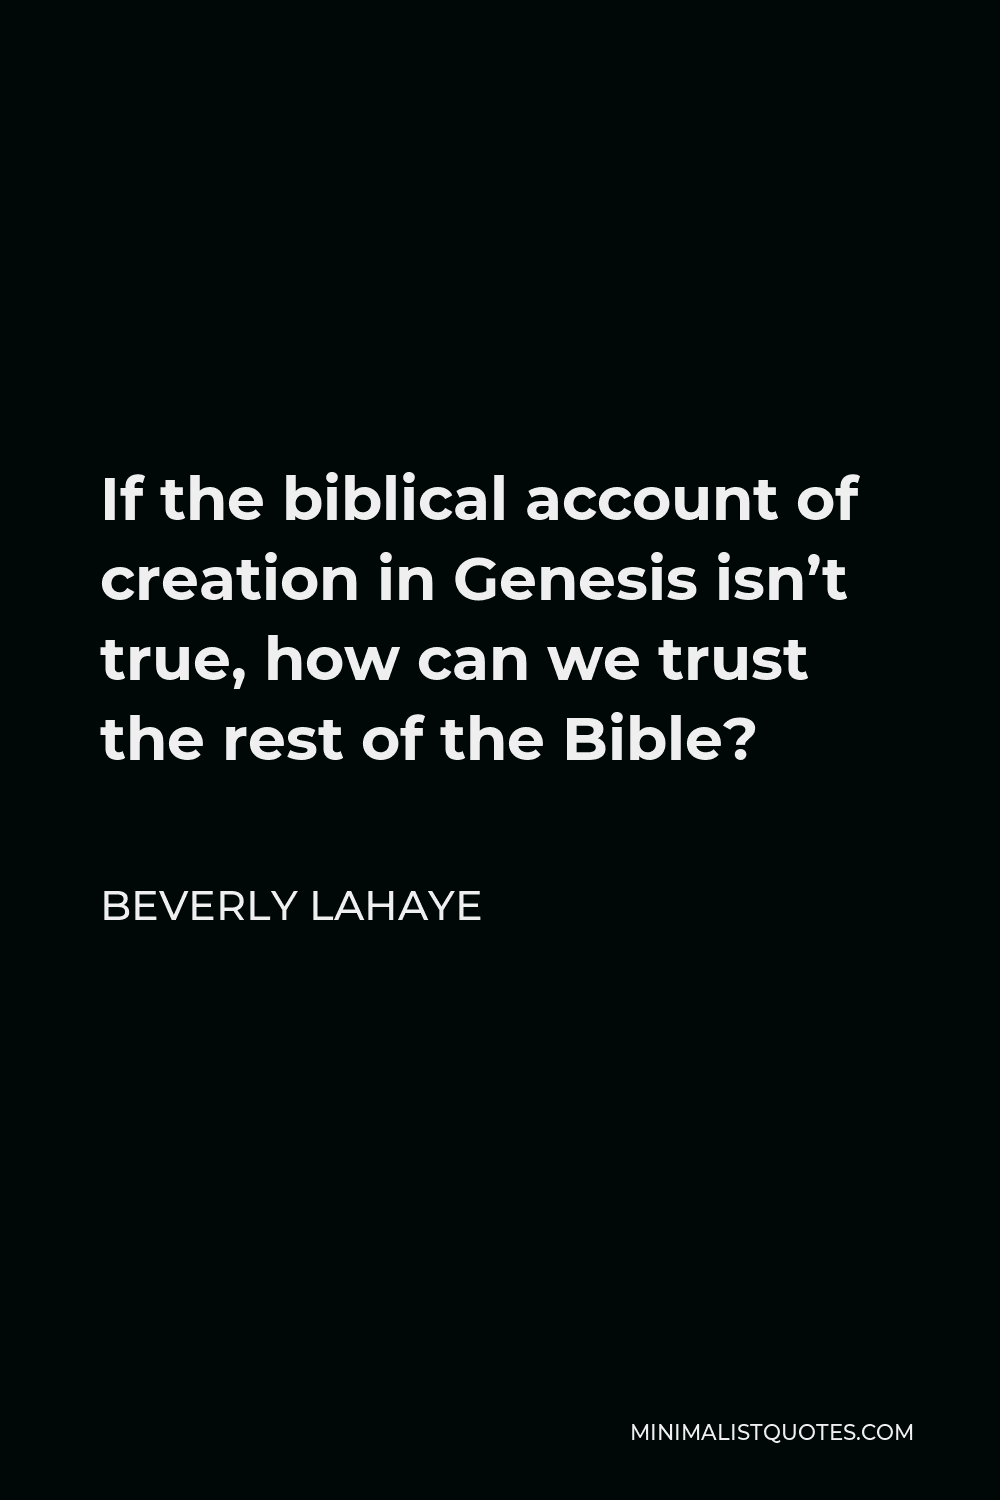 Beverly LaHaye Quote - If the biblical account of creation in Genesis isn’t true, how can we trust the rest of the Bible?